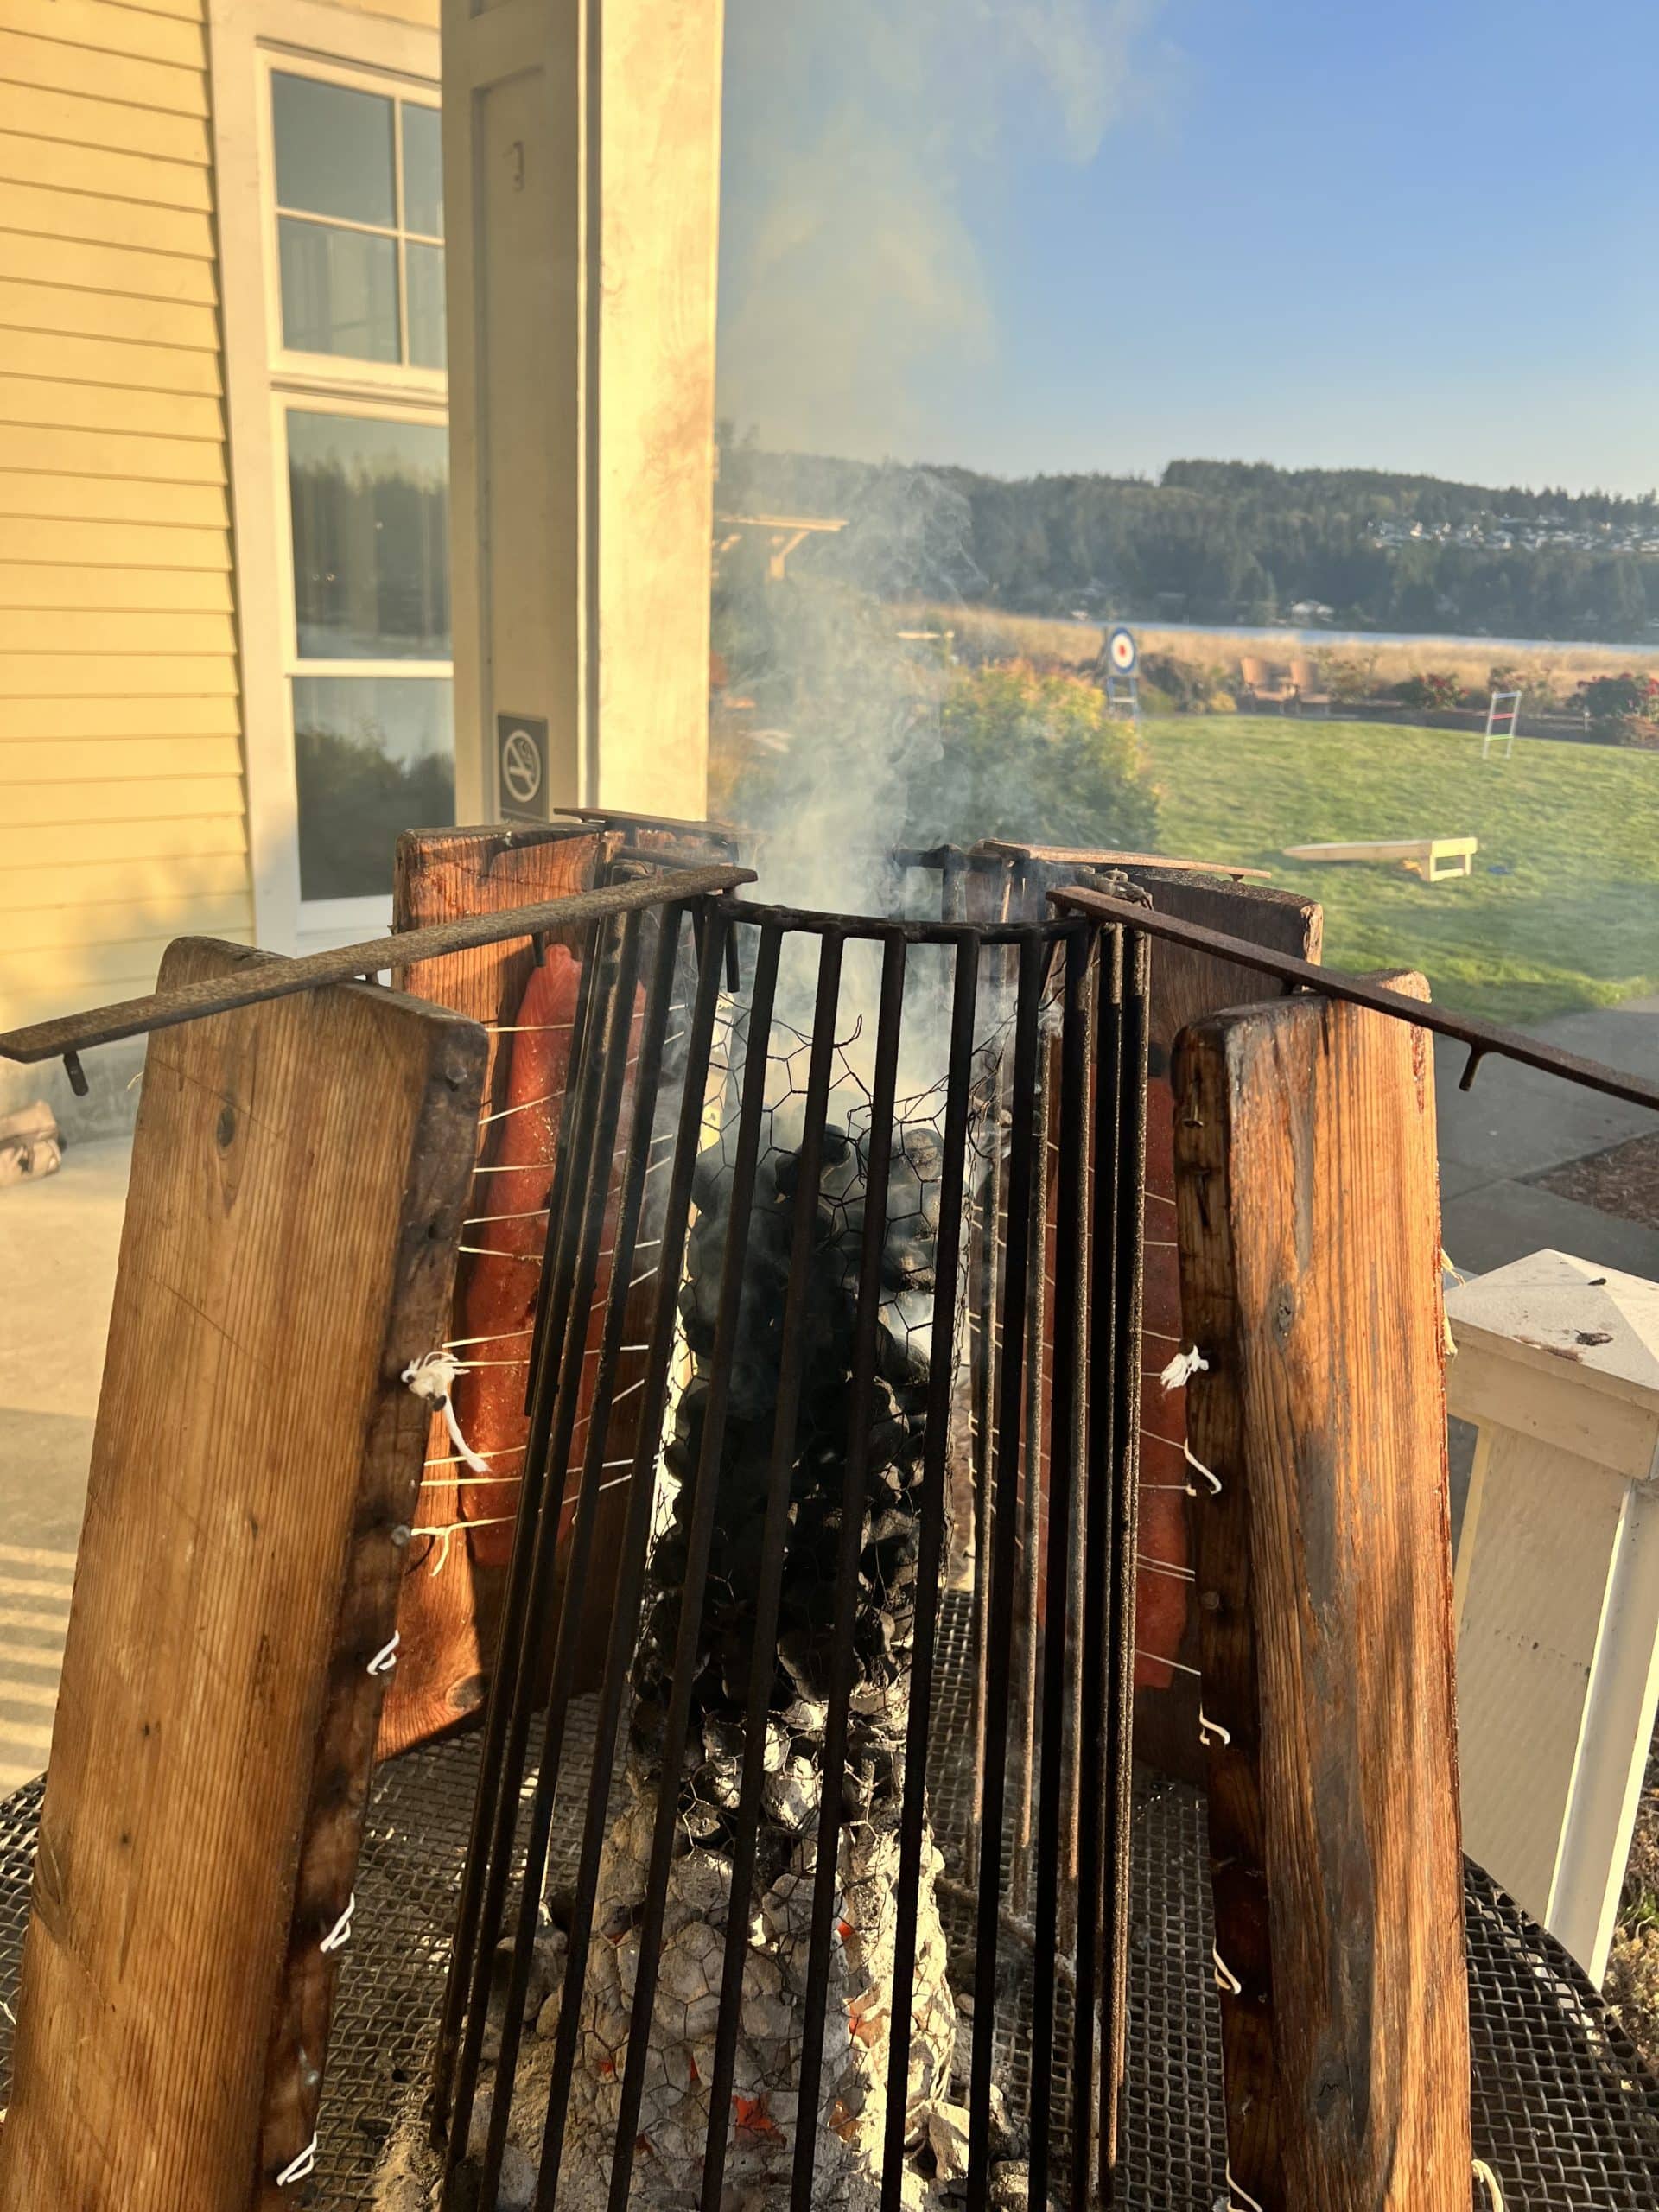 A traditional salmon bake at the Inn at Port Ludlow